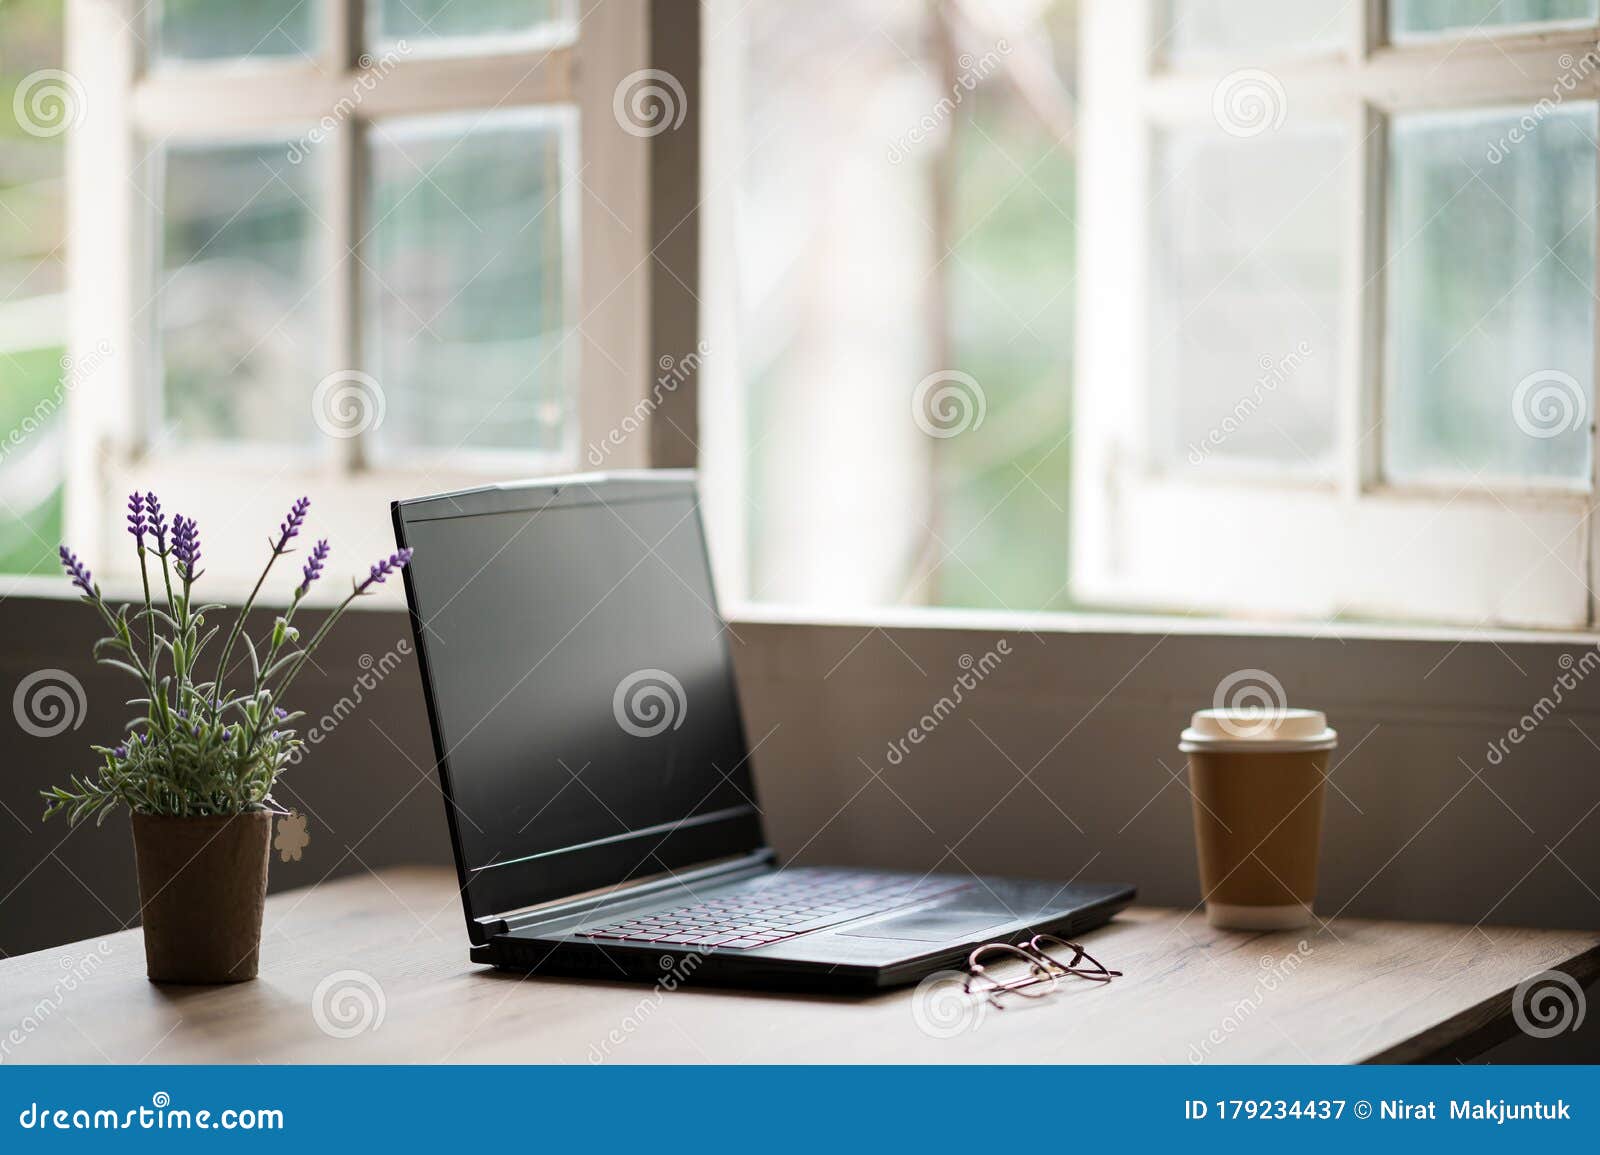 A Laptop on the Desk for Work at Home Stock Image - Image of busy